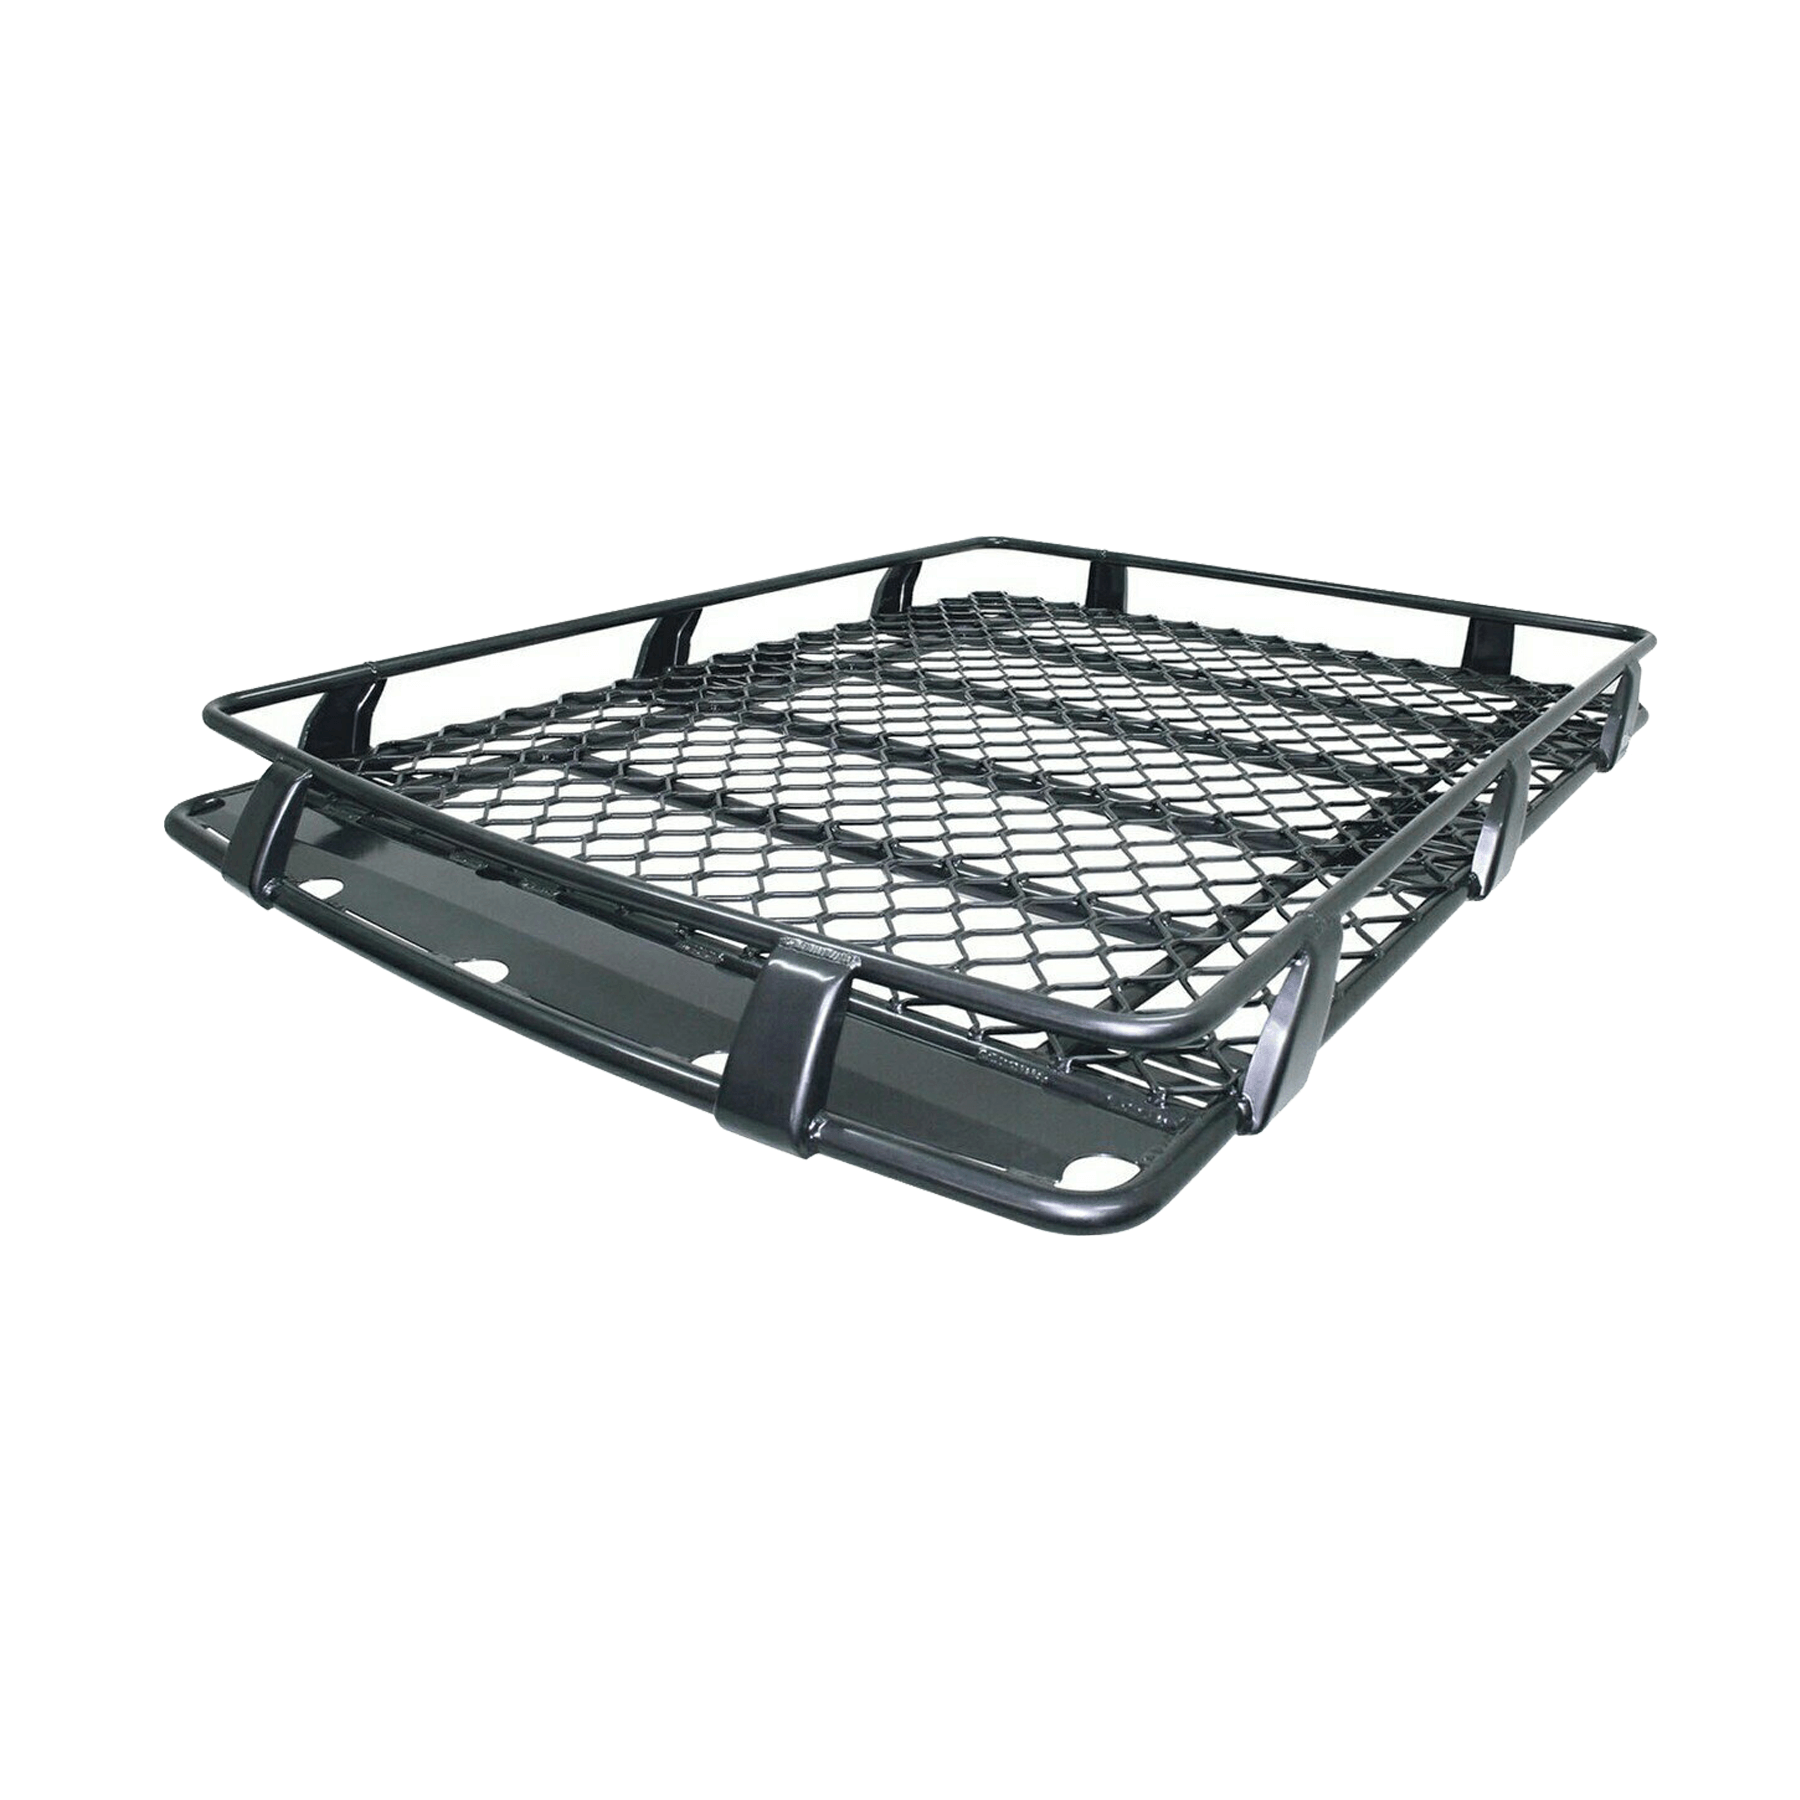 LANDCRUISER 78 SERIES 1999 to 2007  Basket Alloy Roof Rack- 1.8m x 1.25m (Open end)